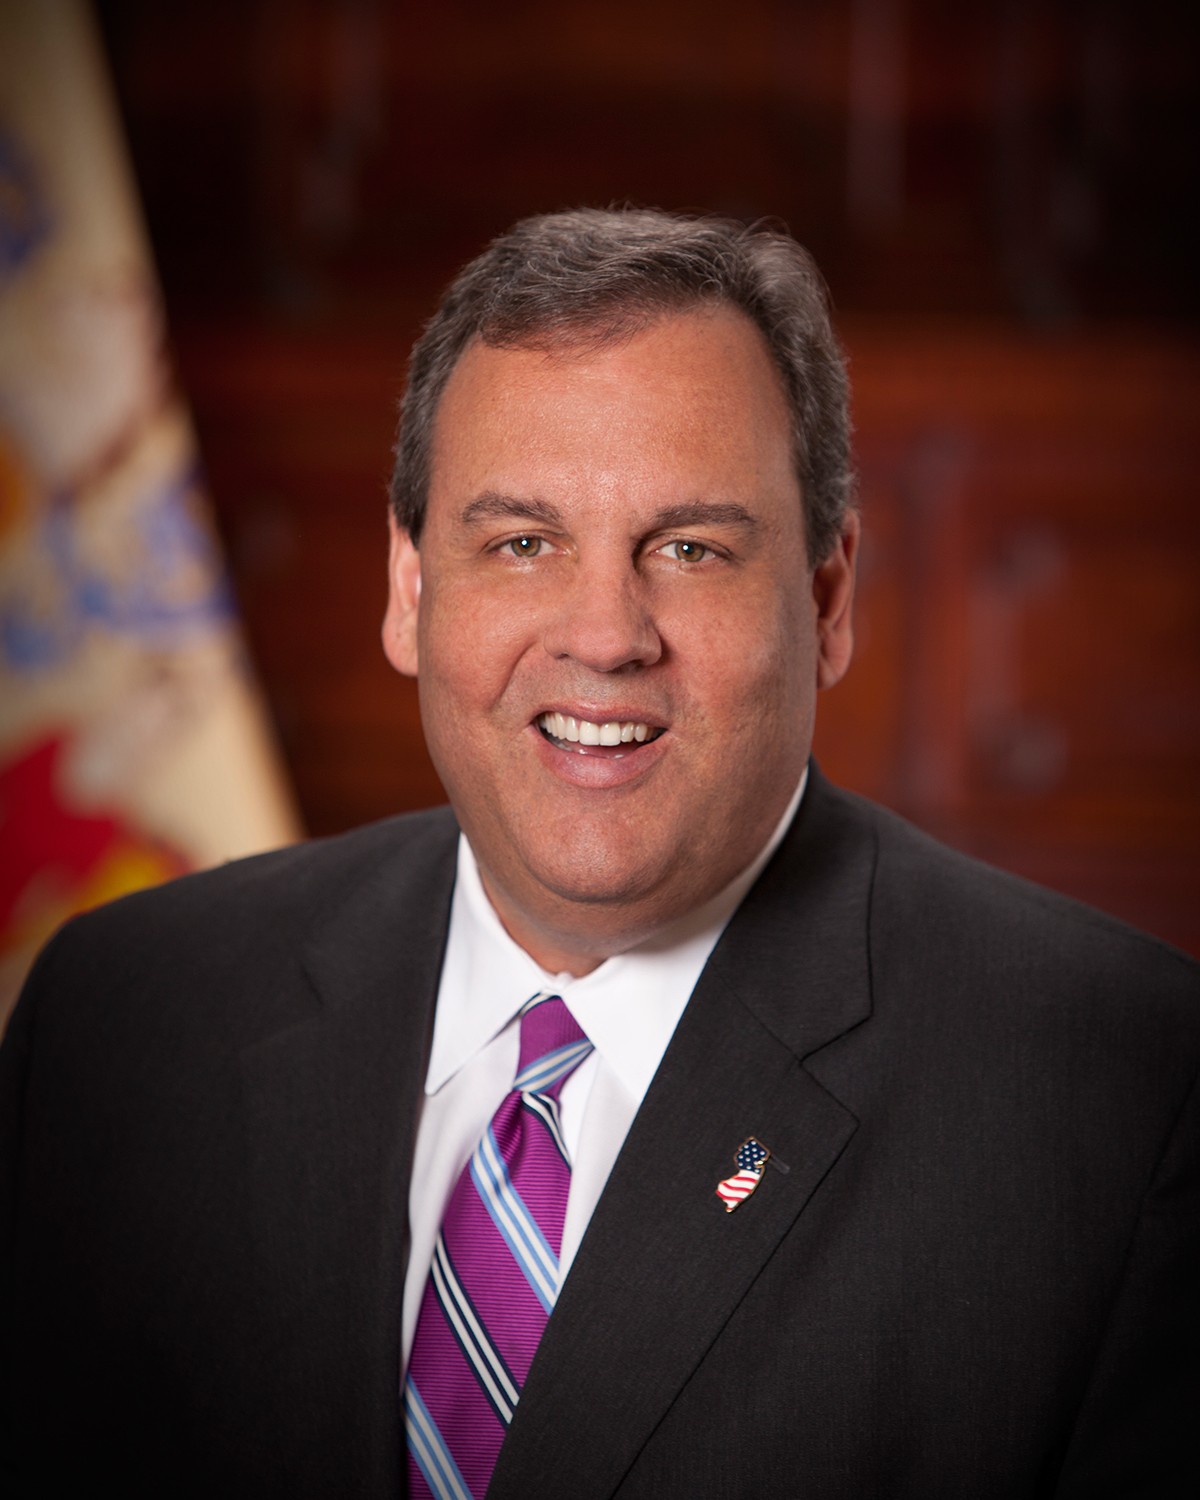 $830M in Tax Breaks Later, Christie Says His Camden Plan Won’t Work for America